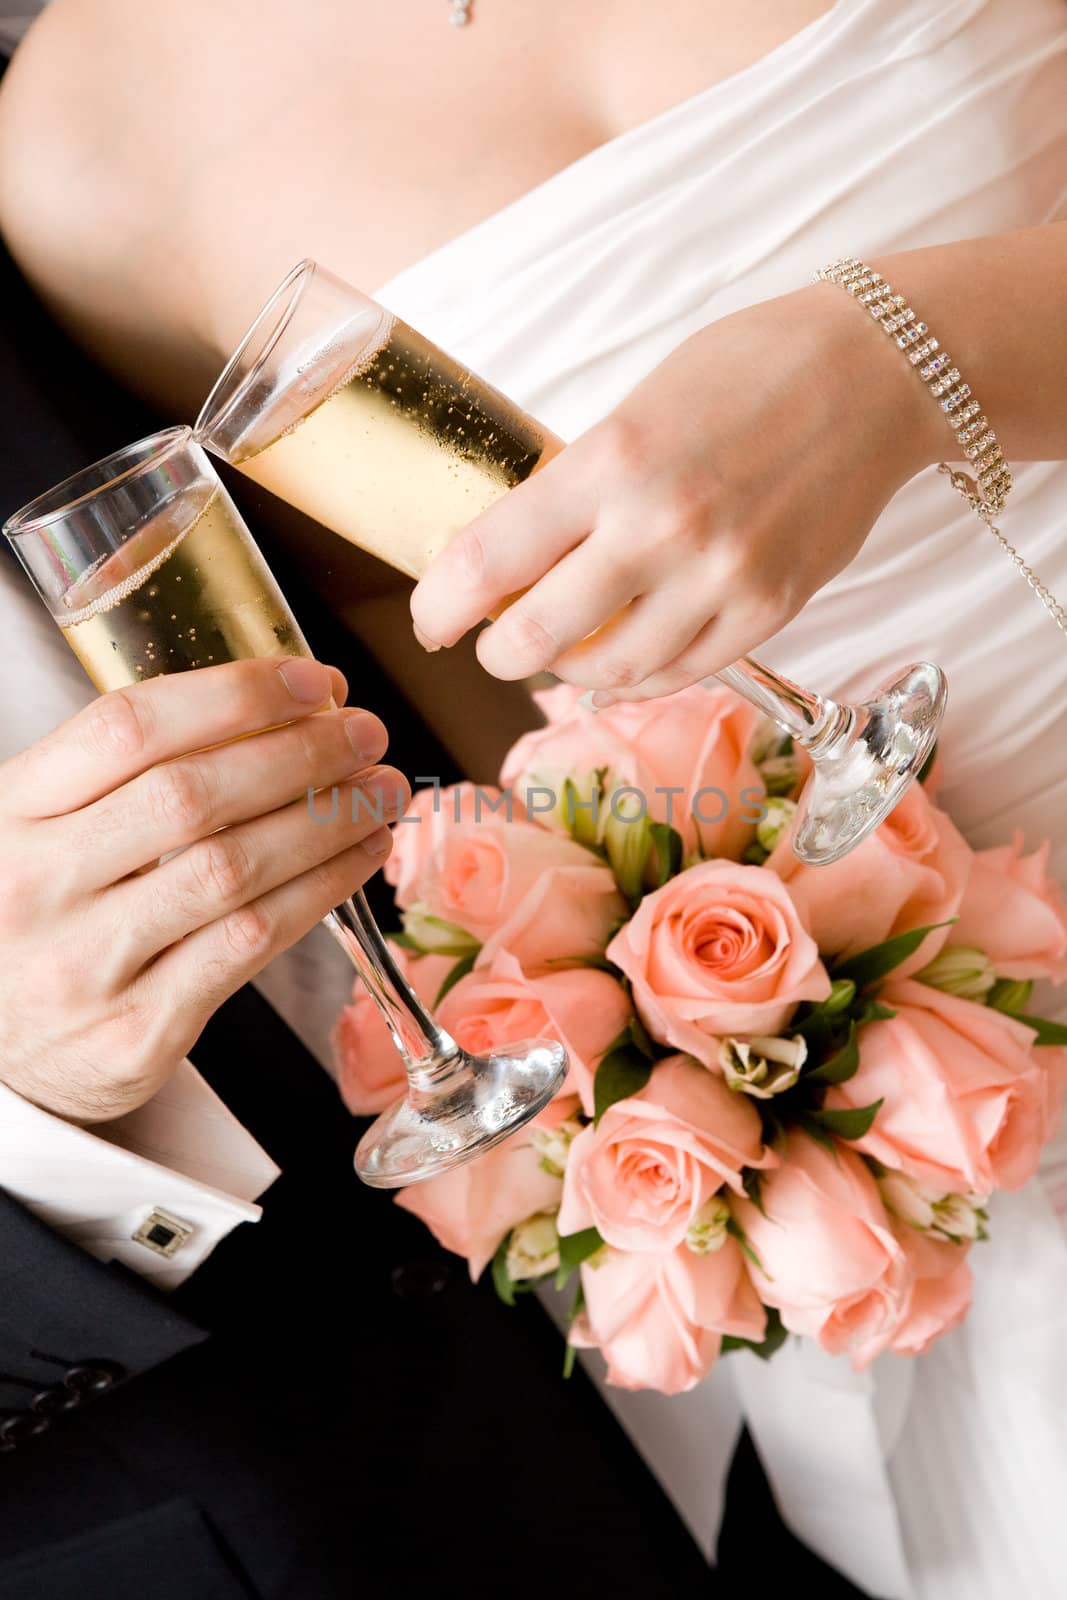 marriage champagne by vsurkov